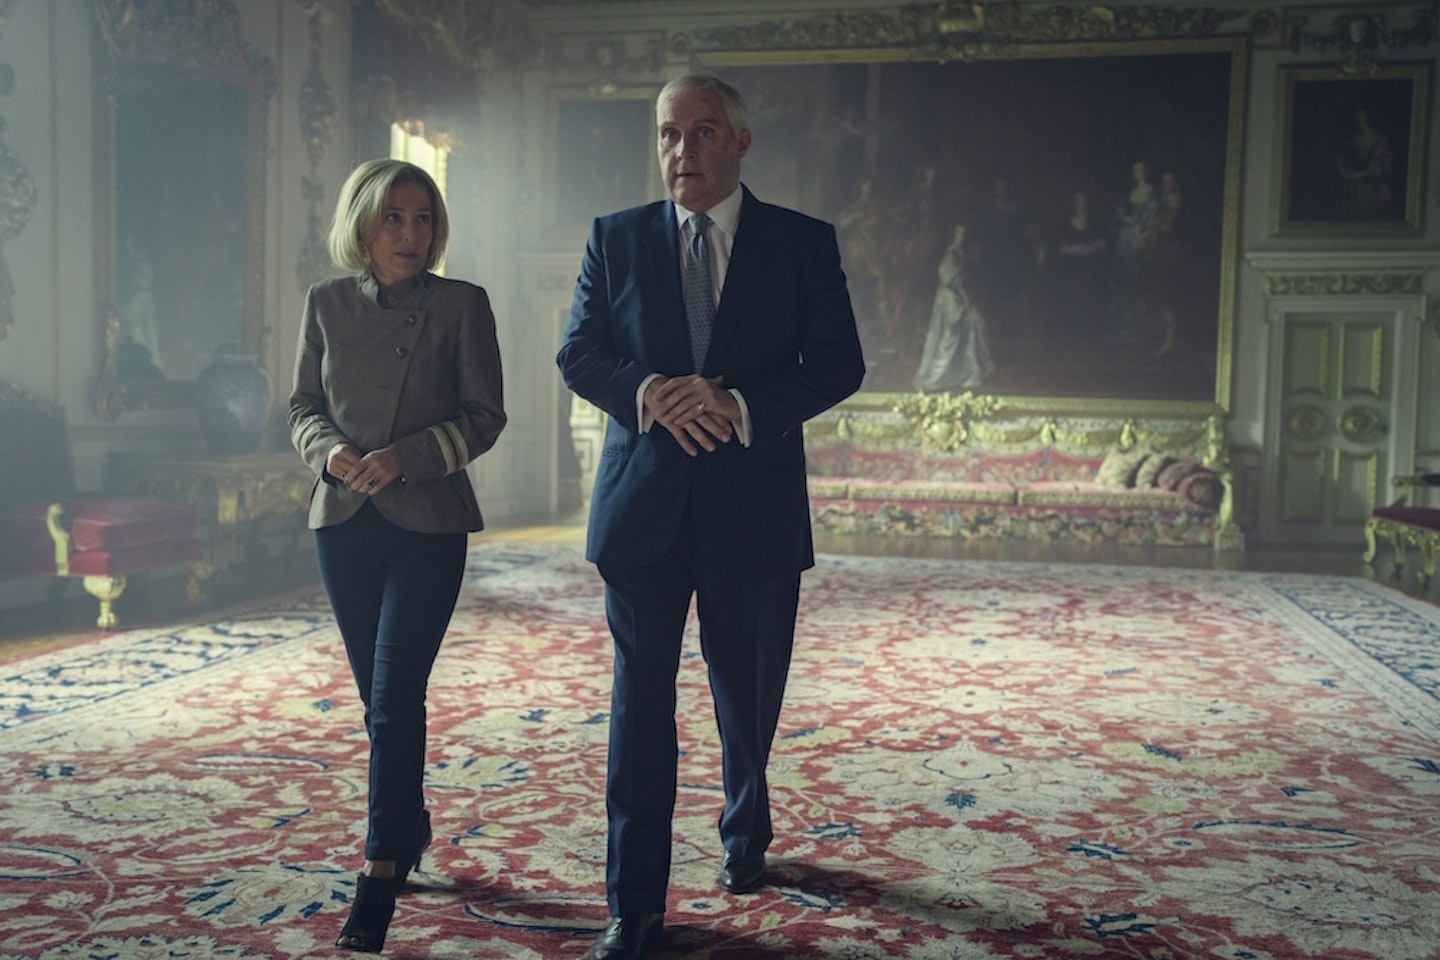 Prince Andrew (Rufus Sewell) gives Emily Maitlis (Gillian Anderson) a tour of the palace